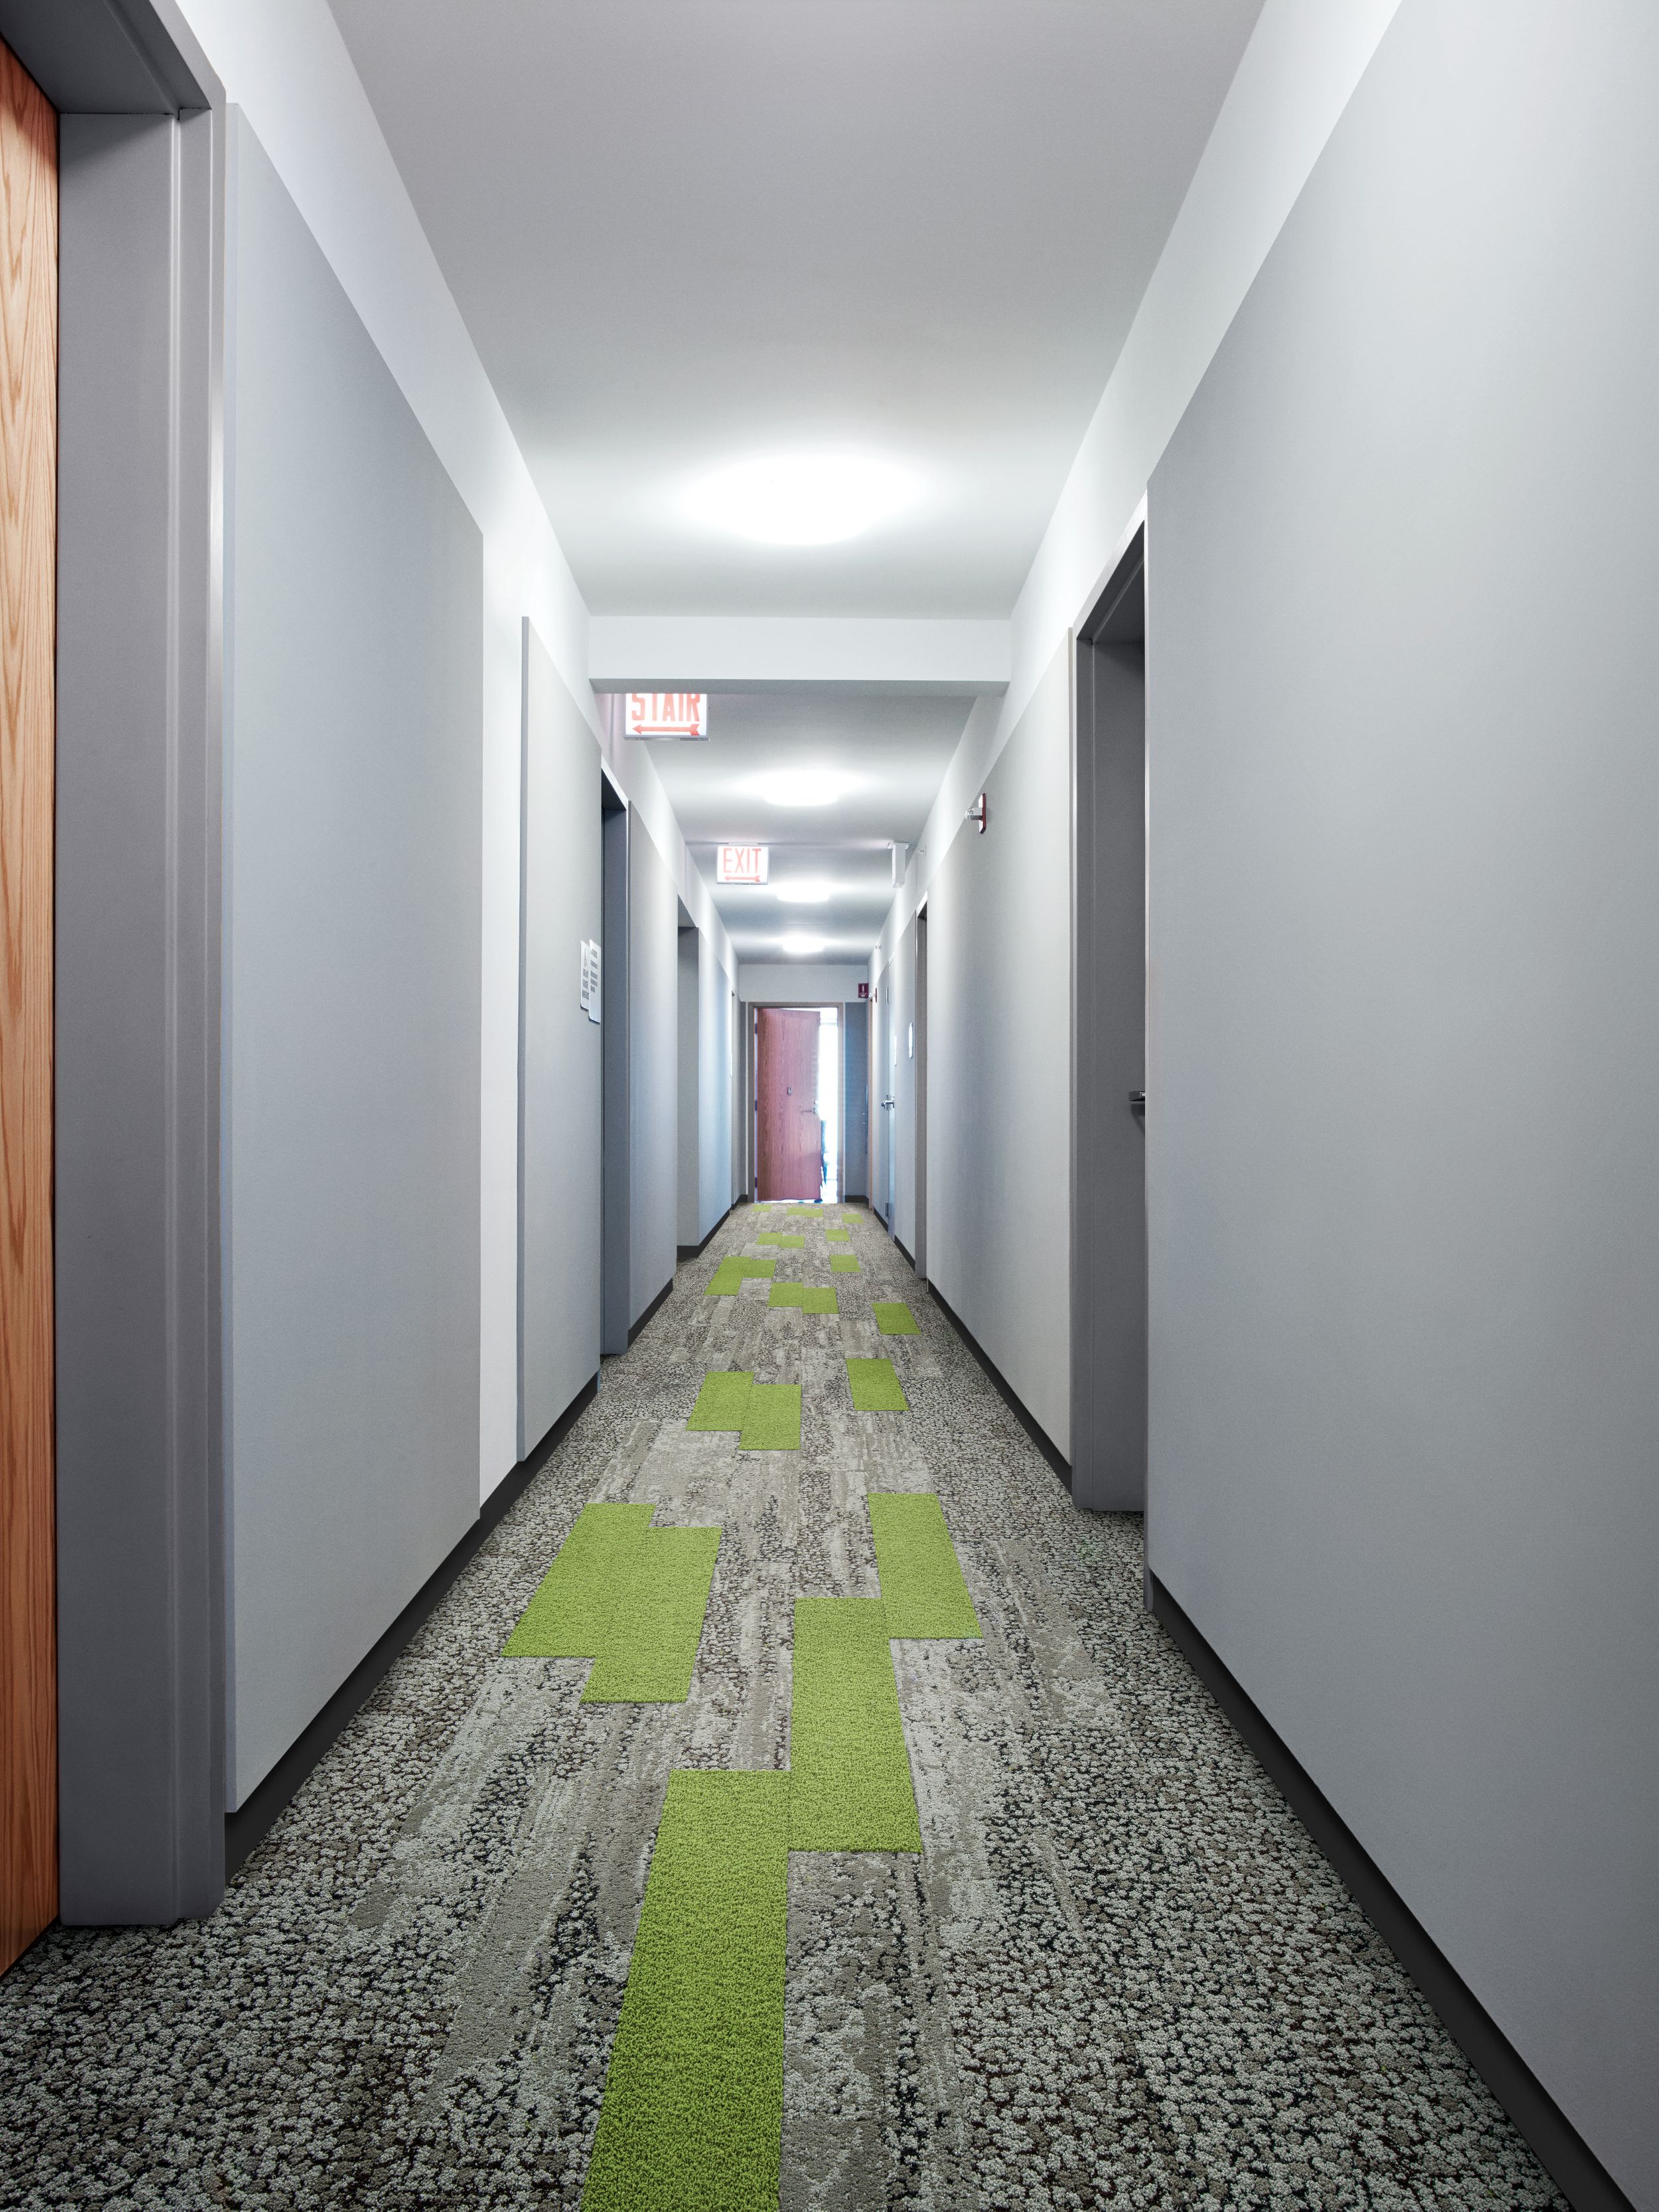 image Interface HN830 and HN850 plank carpet tiles in long corridor with mutliple doors and wood door at end numéro 2